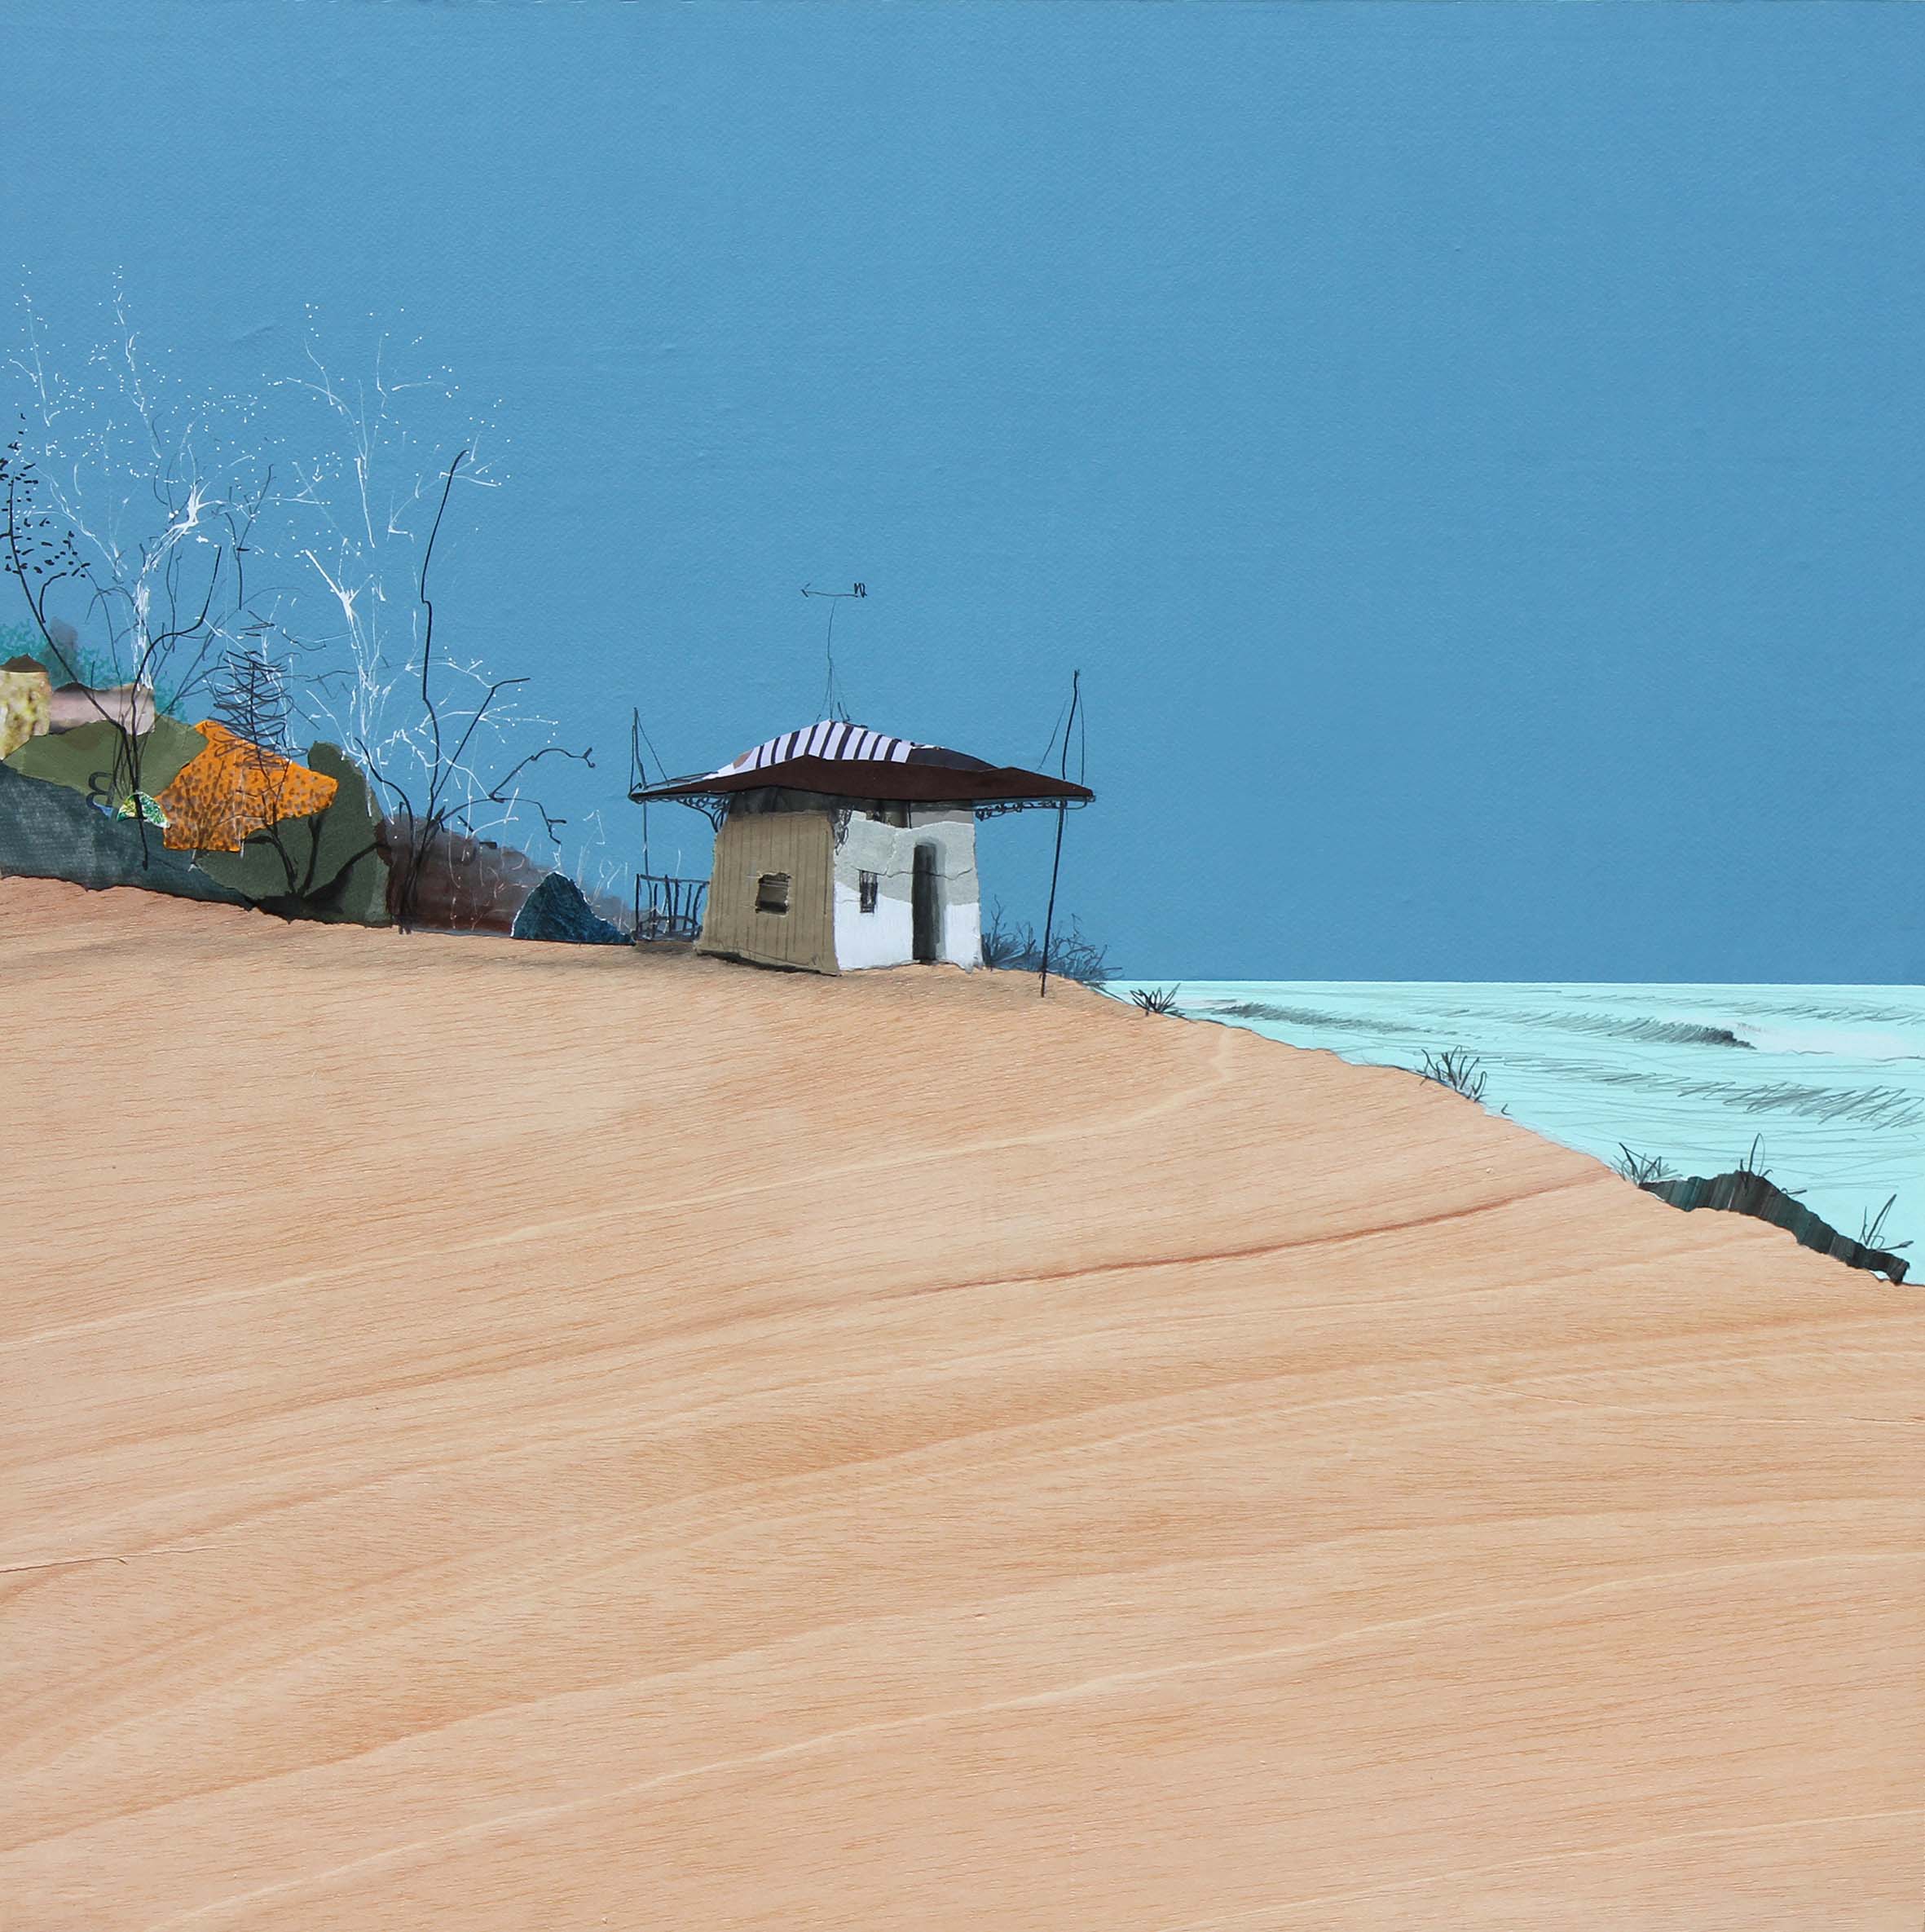 A desert hut against a backdrop of bright blue skies. 